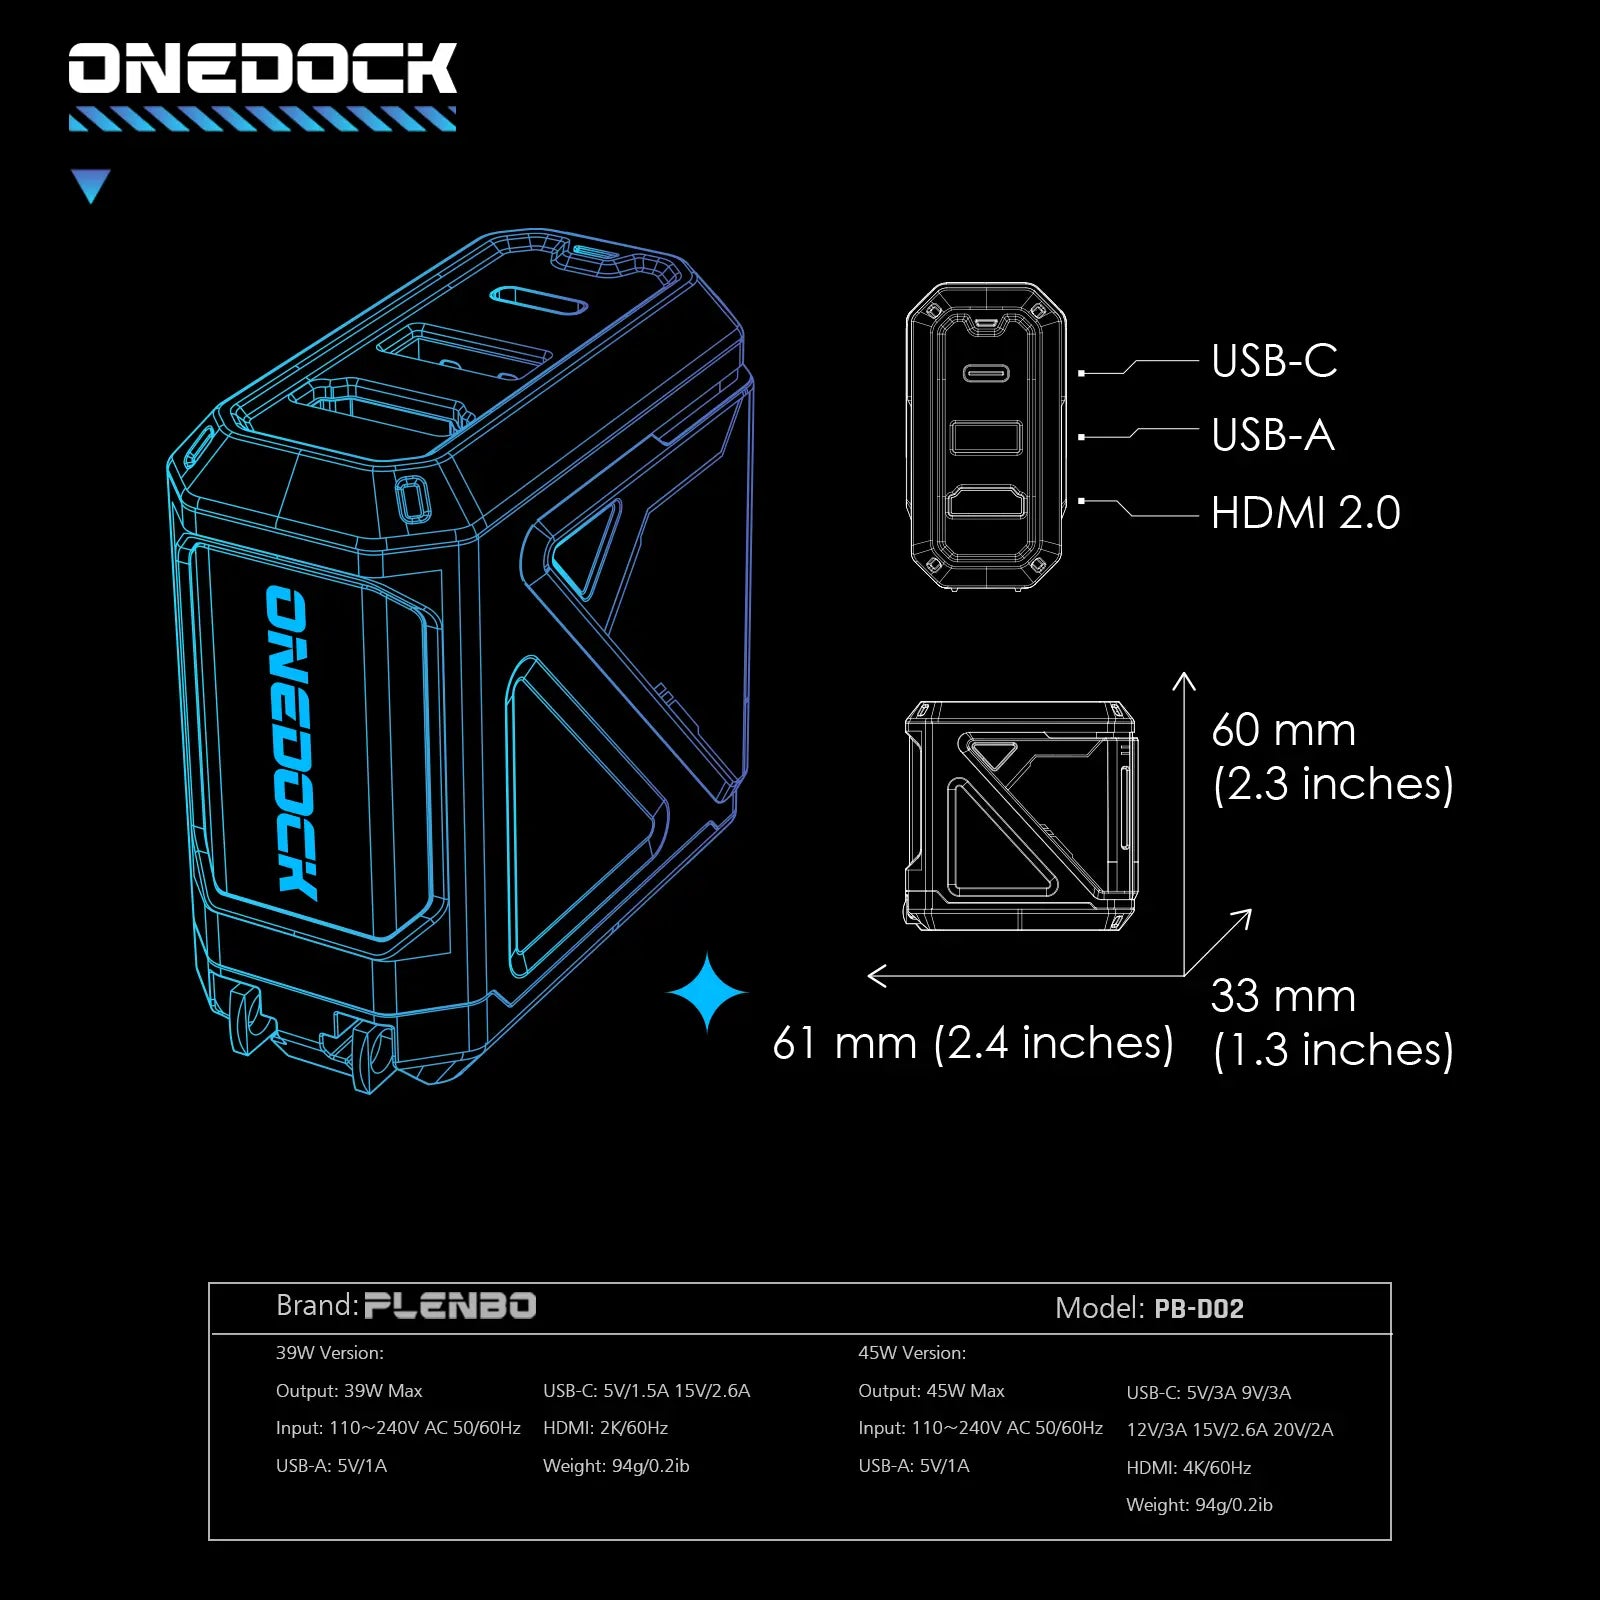 Specification of Onedock